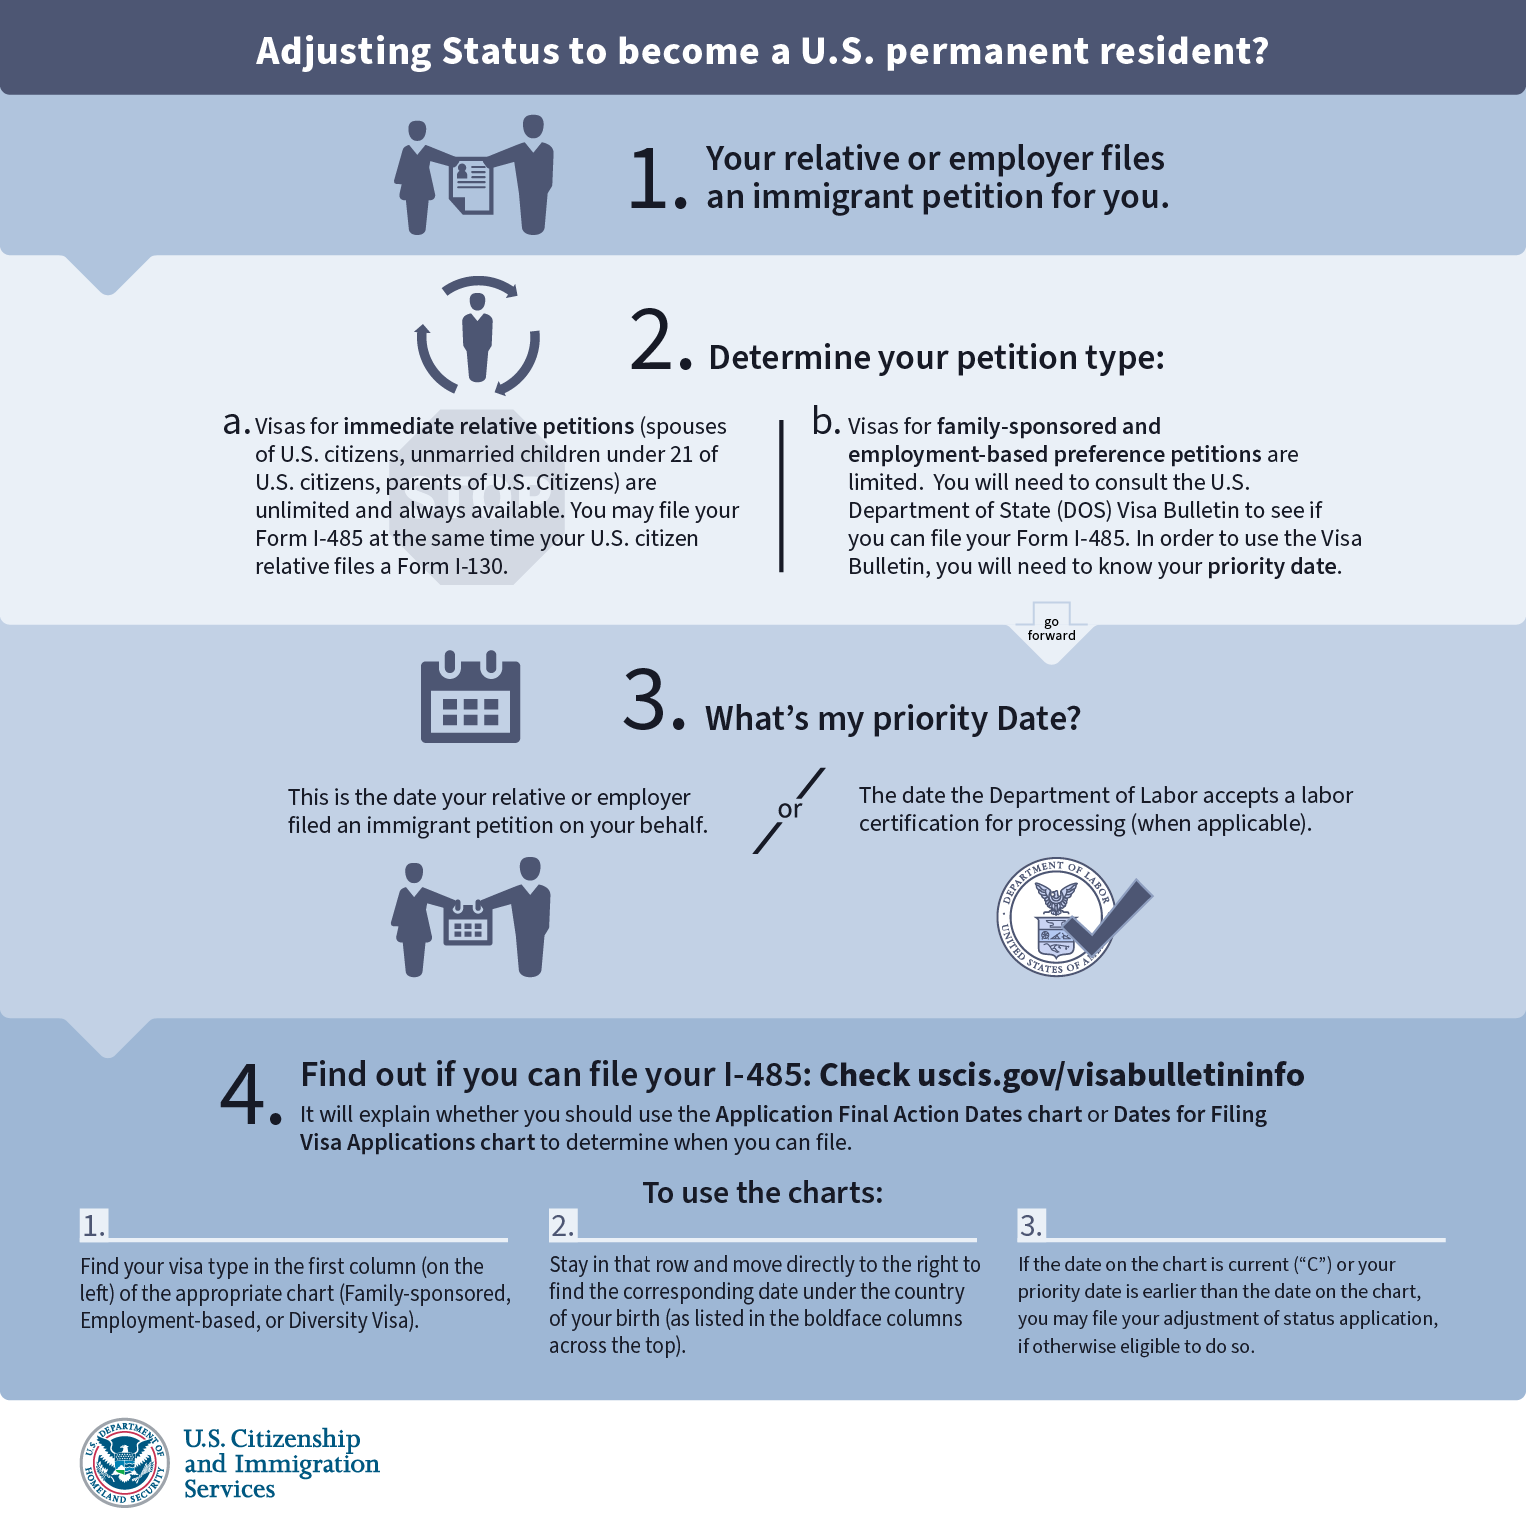 Information graphic of Adjusting Status to become a U.S. permanent resident?1. Your relative or employer files an immigrant petition for you. 2. Determine your petition type 3. What's my priority date? 4. Find out if you can file your I-485: Check uscis.gov/visabulletinginfo